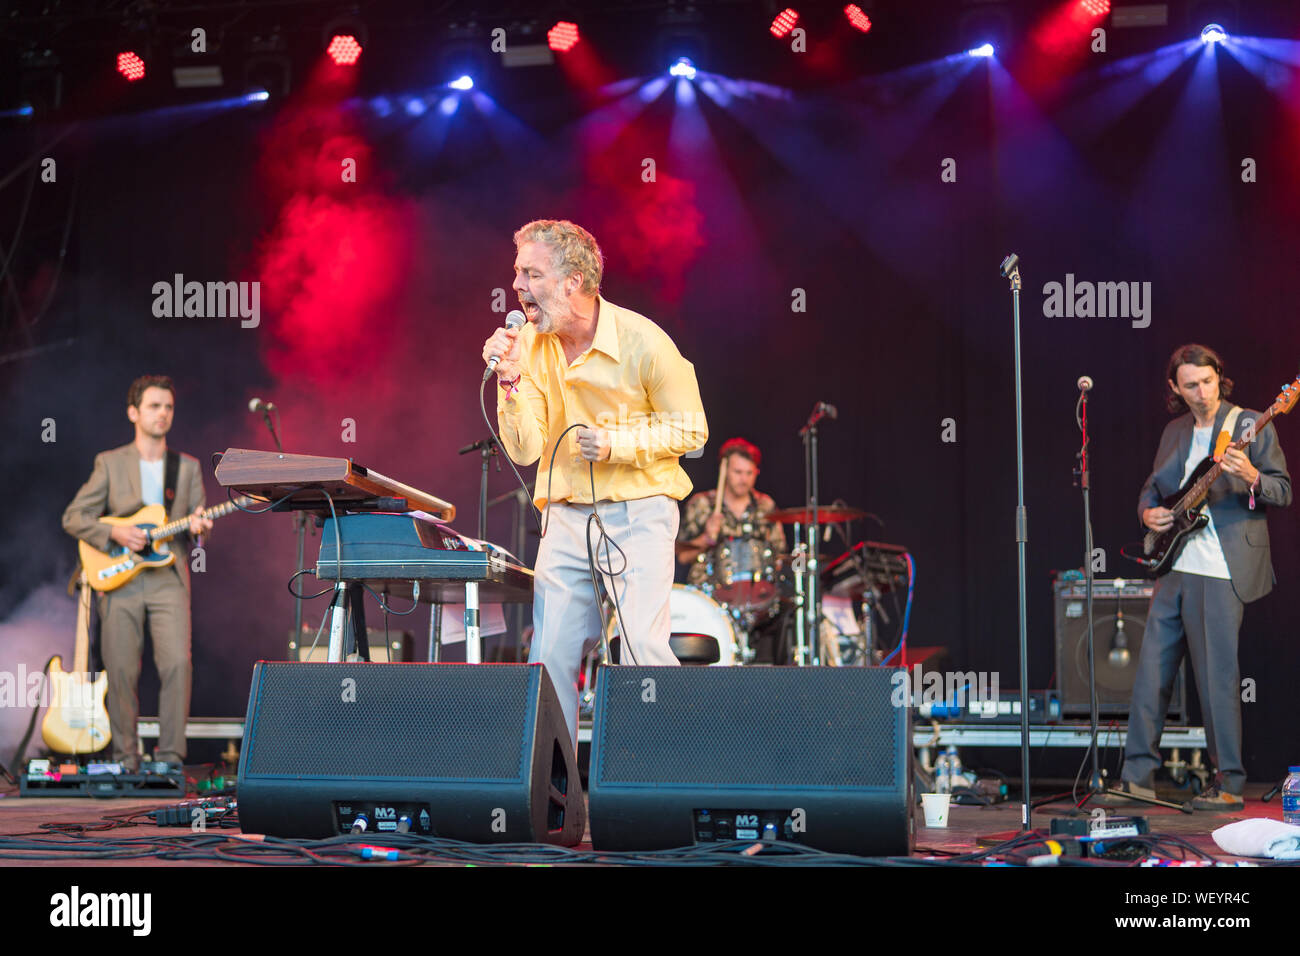 Dorset, UK. Friday, 30 August, 2019. Baxter Dury performing at the 2019 End of the Road Festival. Photo: Roger Garfield/Alamy Live News Stock Photo